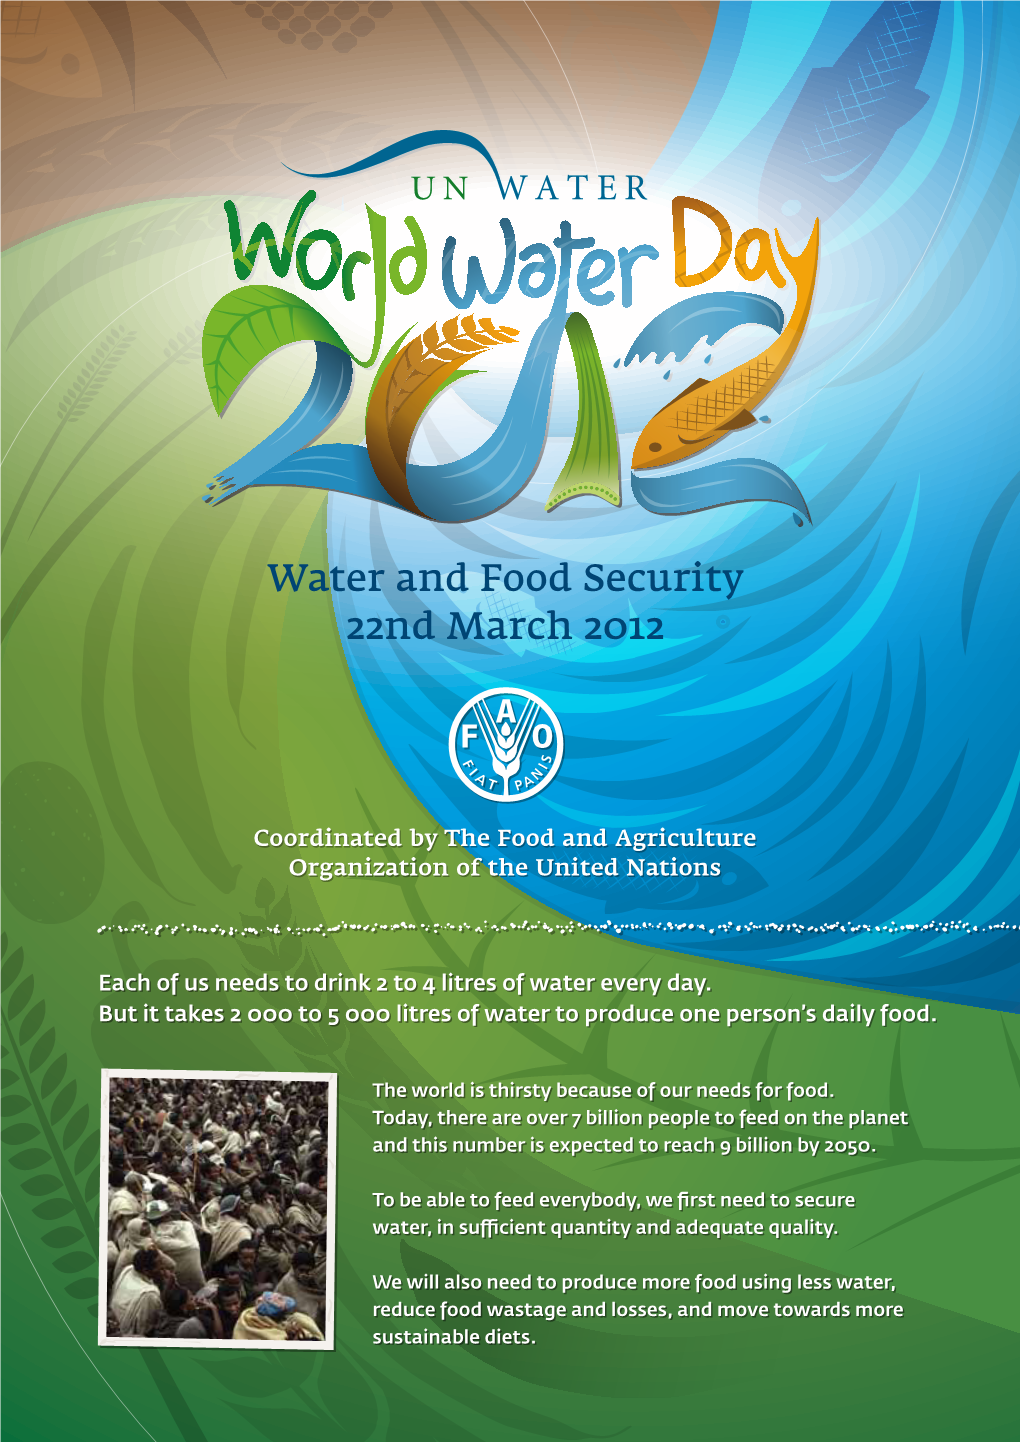 World Water Day 2012 Is Coordinated by the Food and Agriculture Organization of the United Nations What Is the Future, What Are the Challenges?